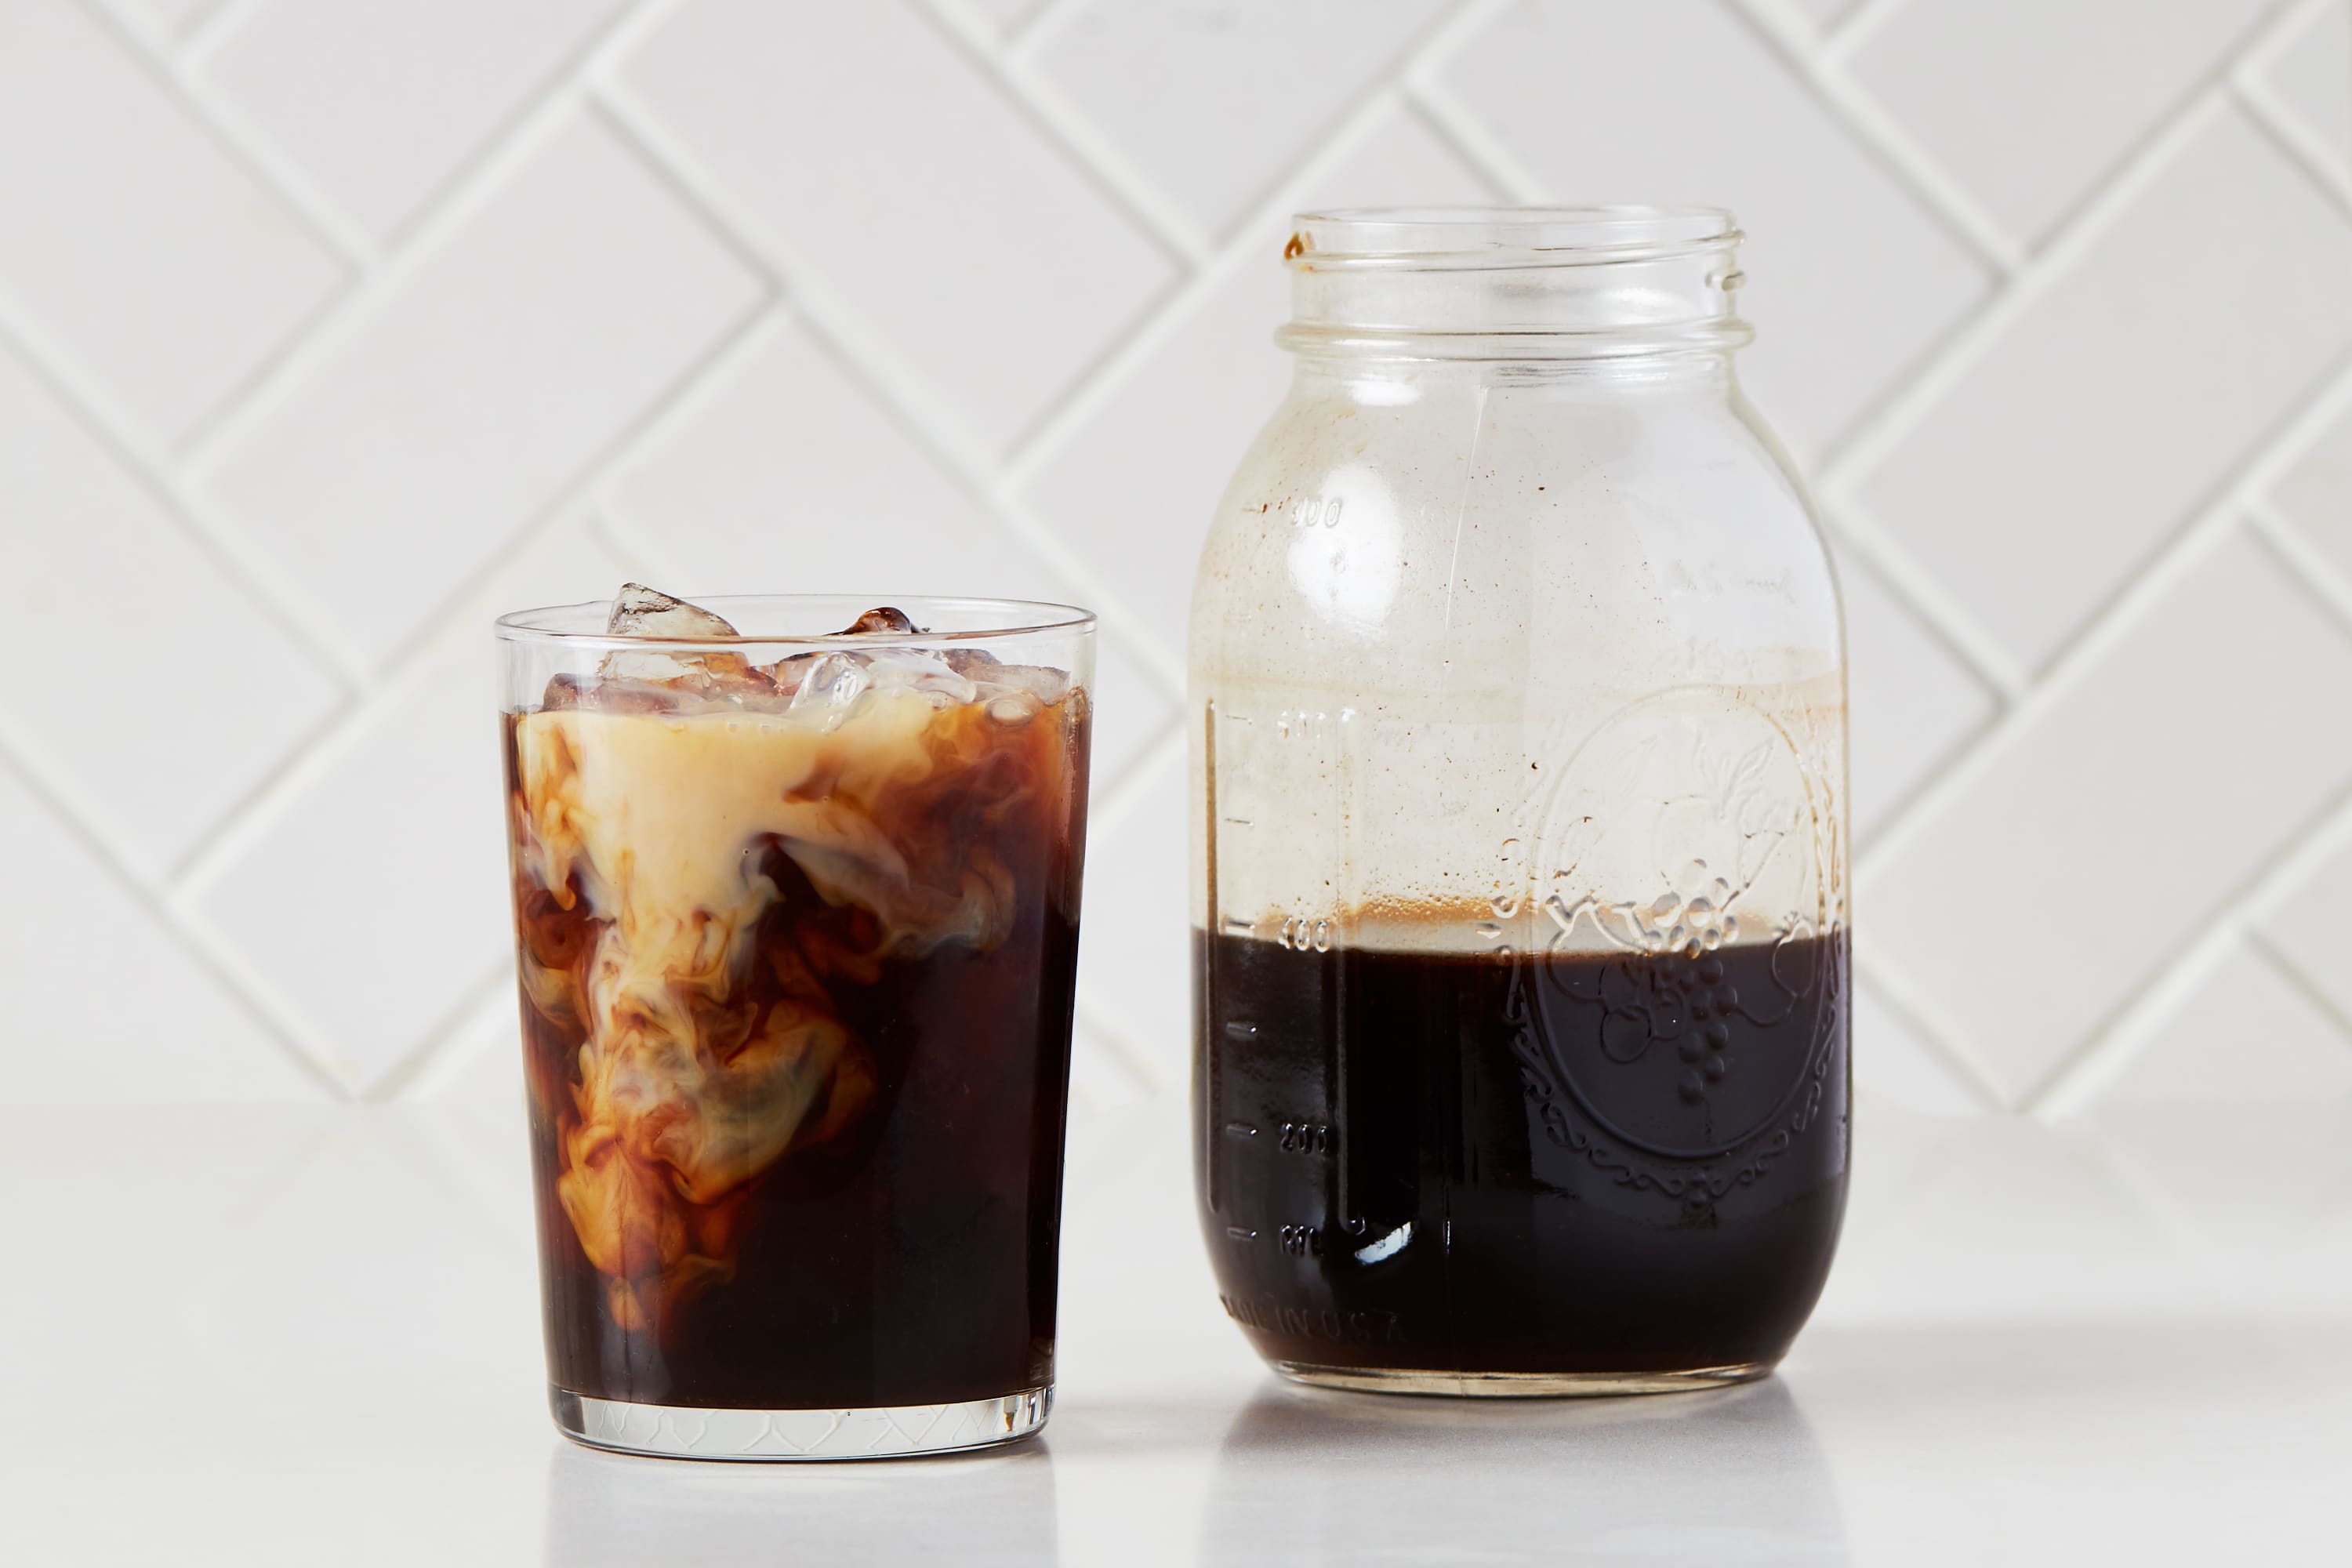 Professional Quality System with Insulated Jar to Keep Your Cold Brew Perfectly Cold Cold Brew Coffee Maker Kit My Mason Makes Make Great Iced Coffee or Tea at Home 